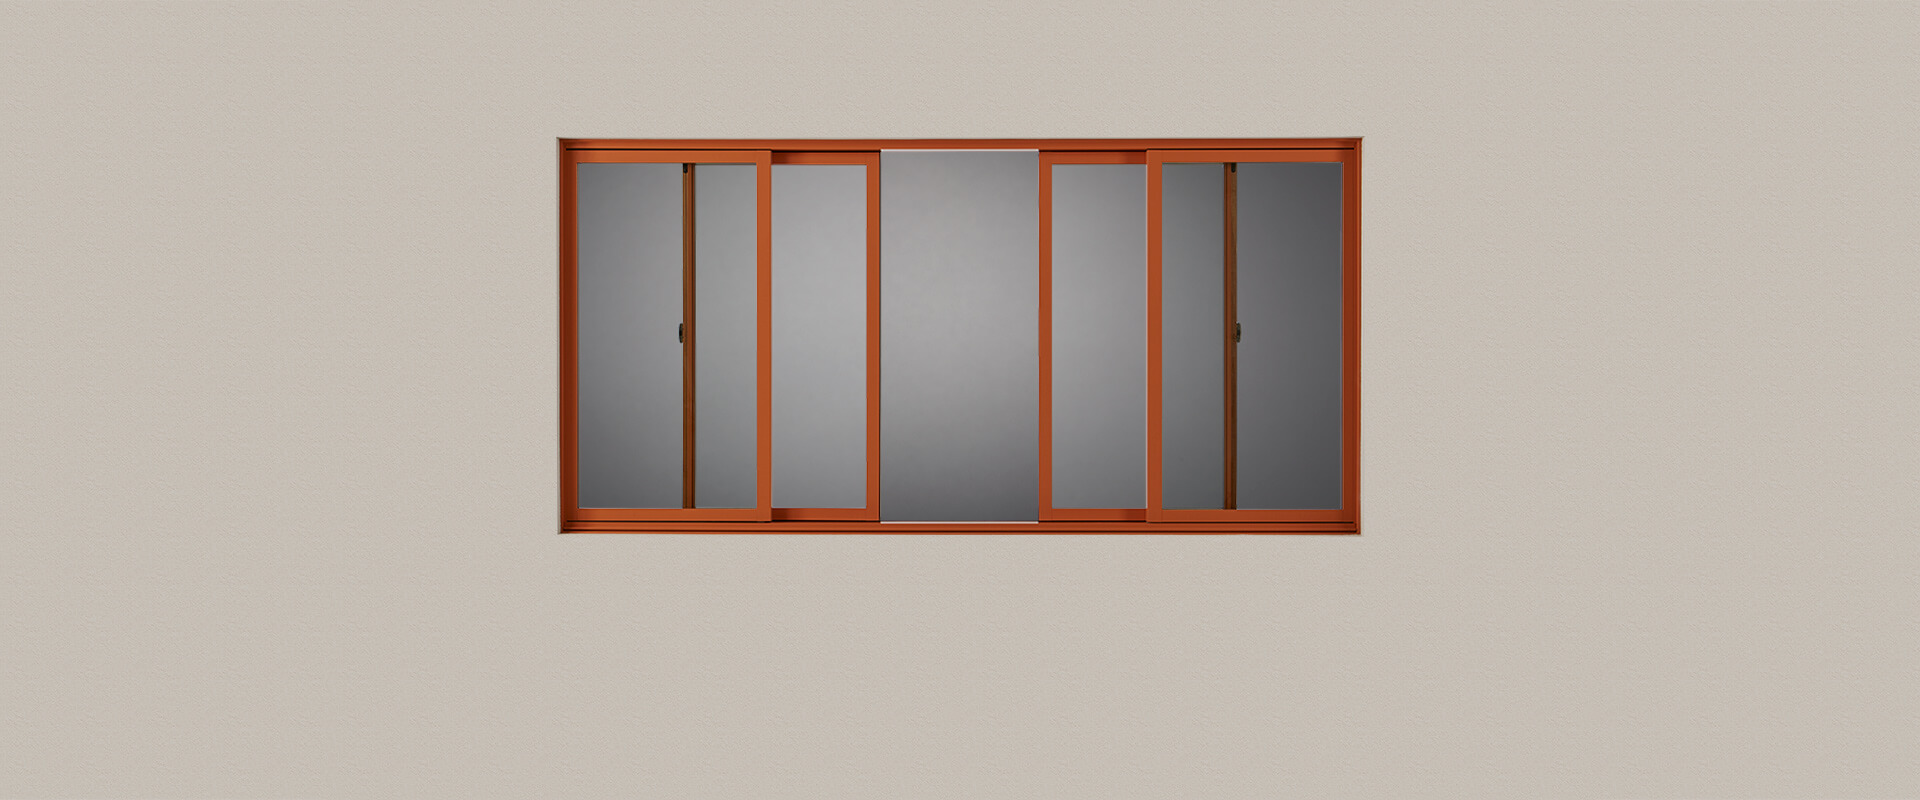 VistaLuxe Complementary quad sliding window with Pumpkin Spice exterior finish.